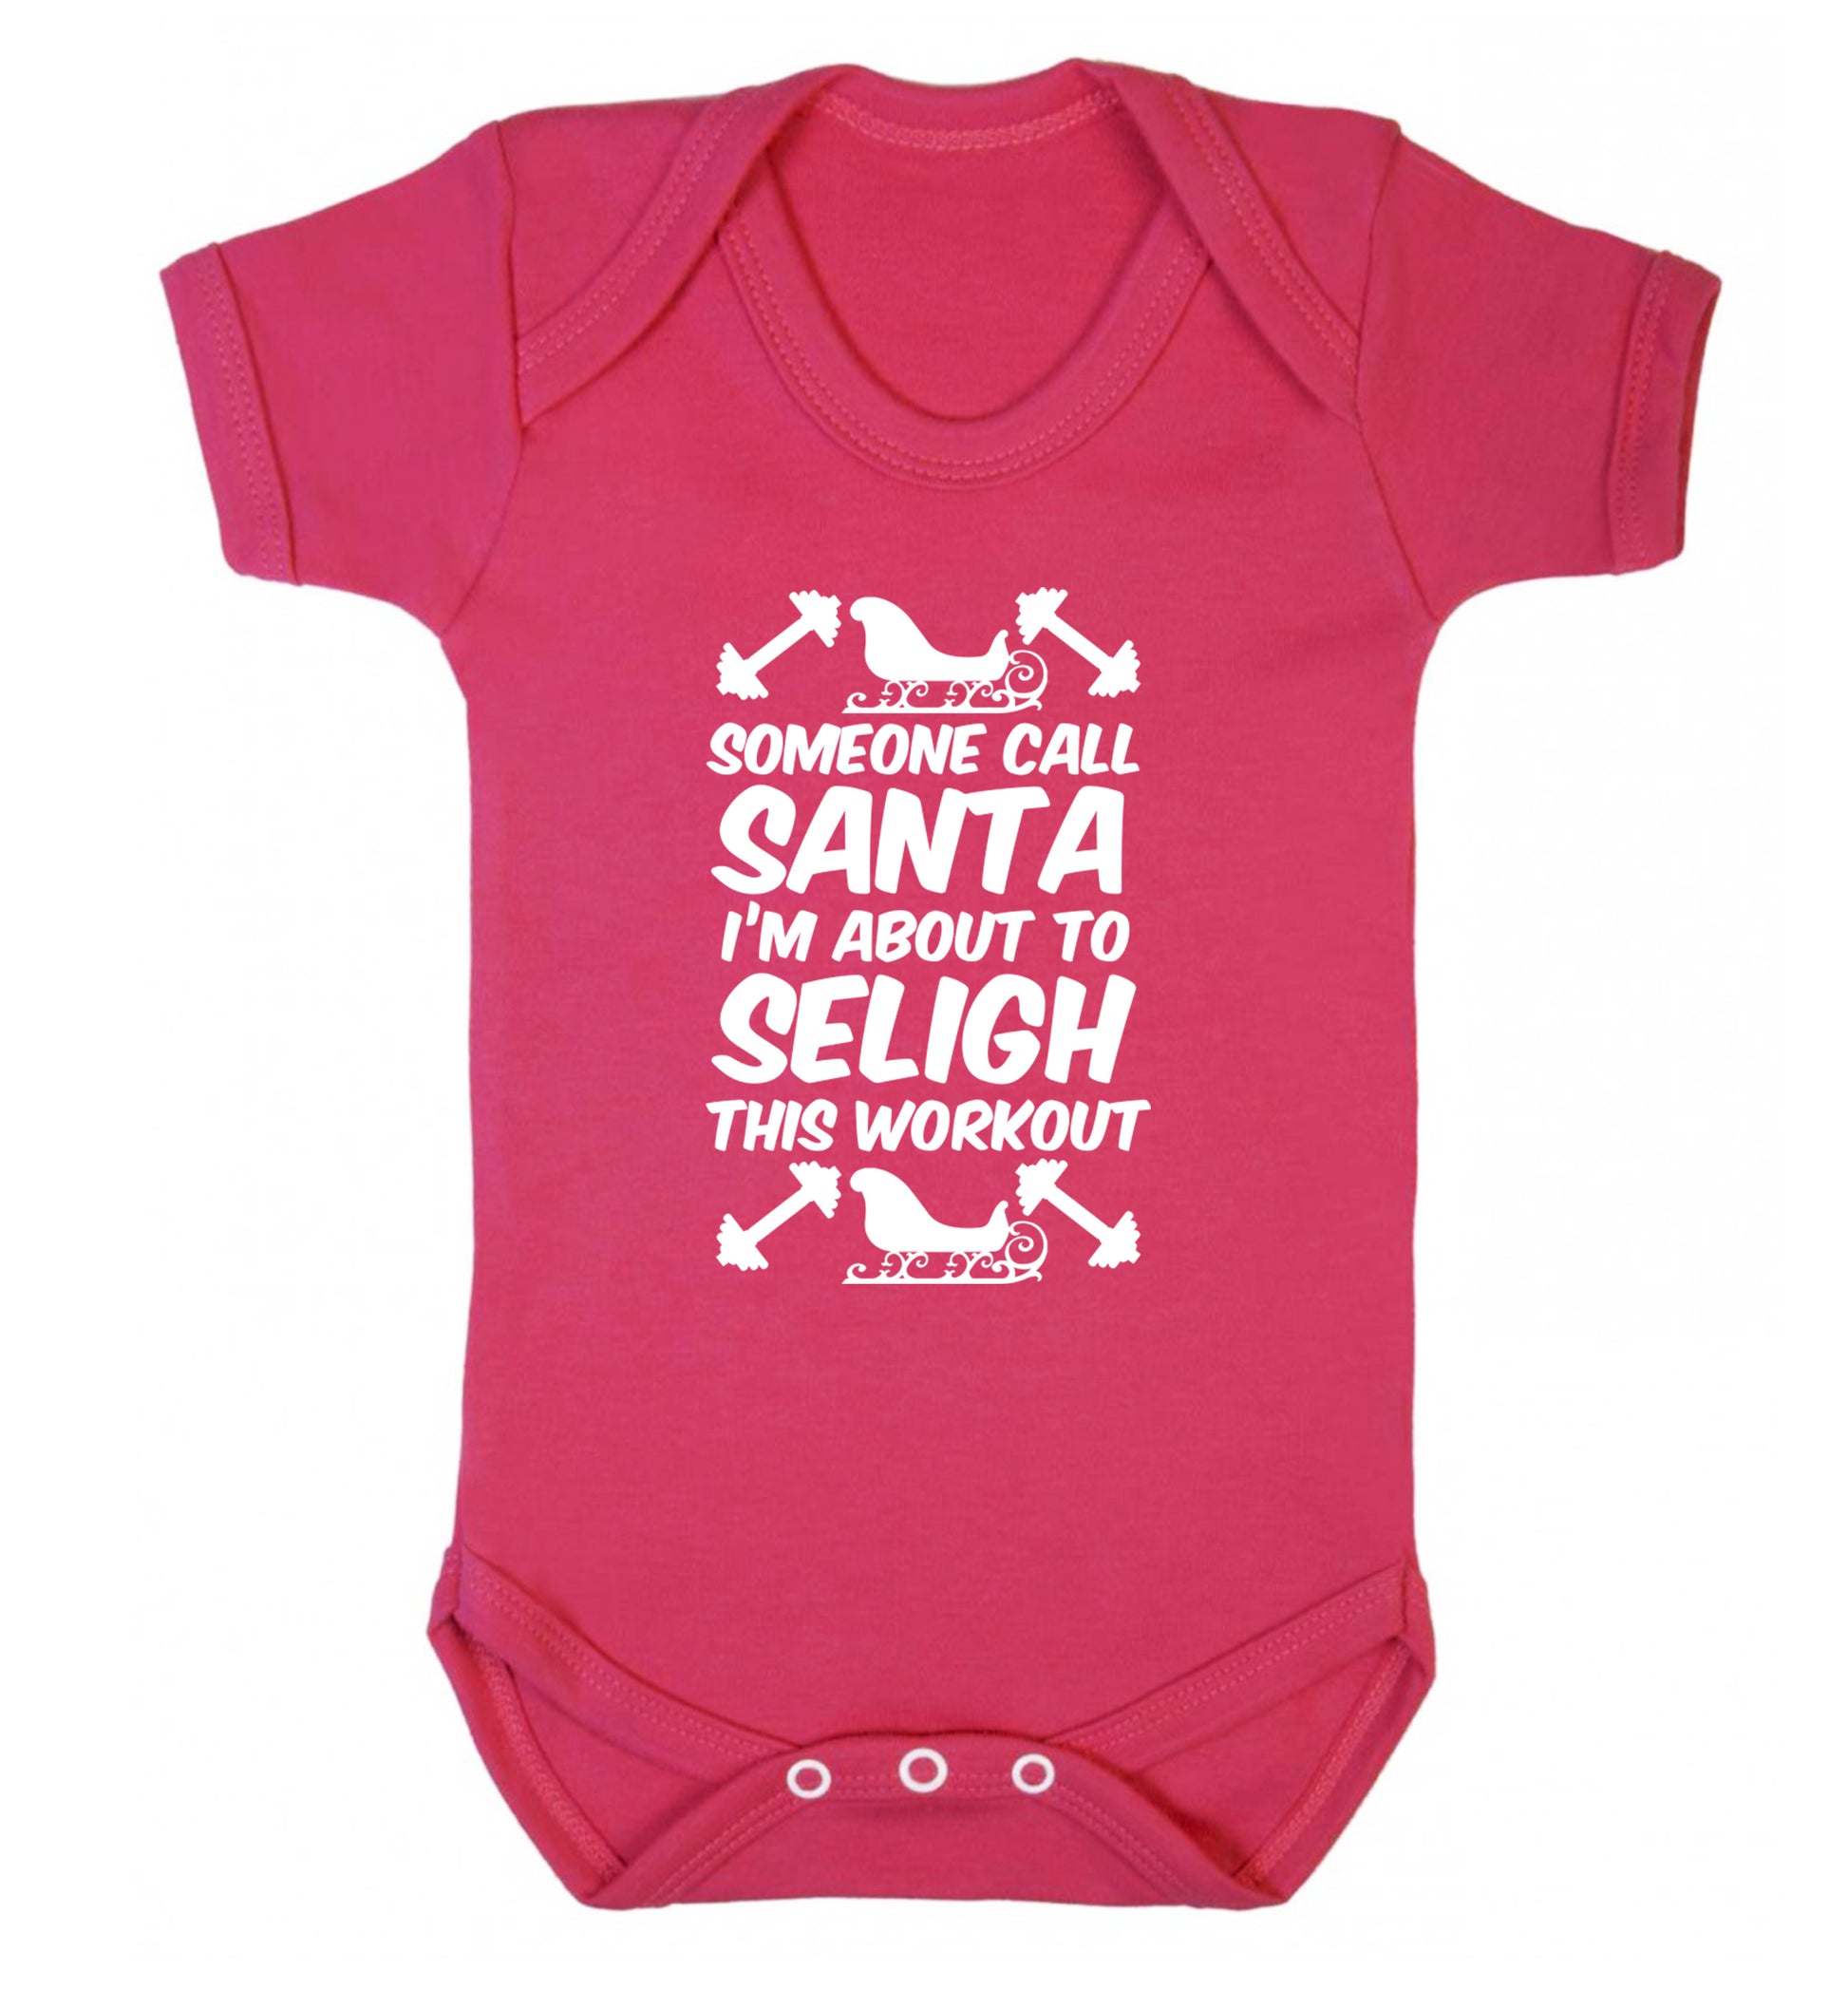 Someone call santa, I'm about to sleigh this workout Baby Vest dark pink 18-24 months